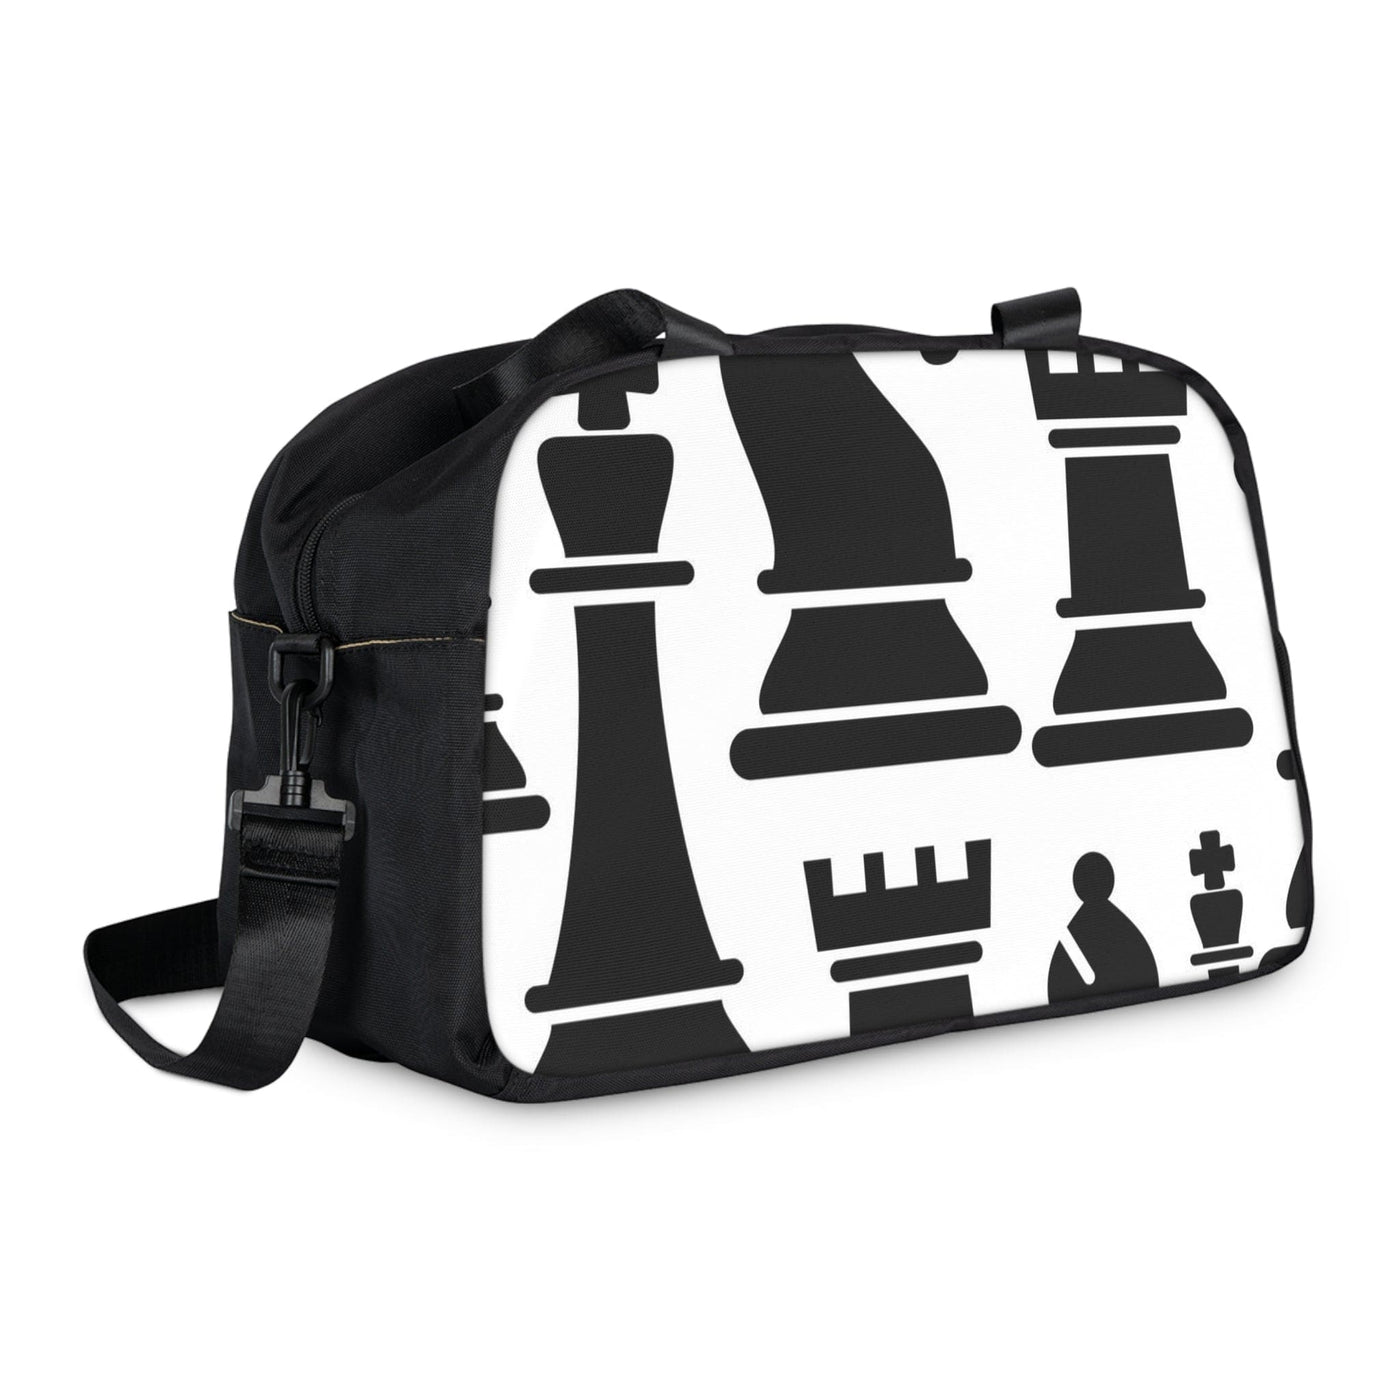 Travel Fitness Bag Black And White Chess Print - Bags